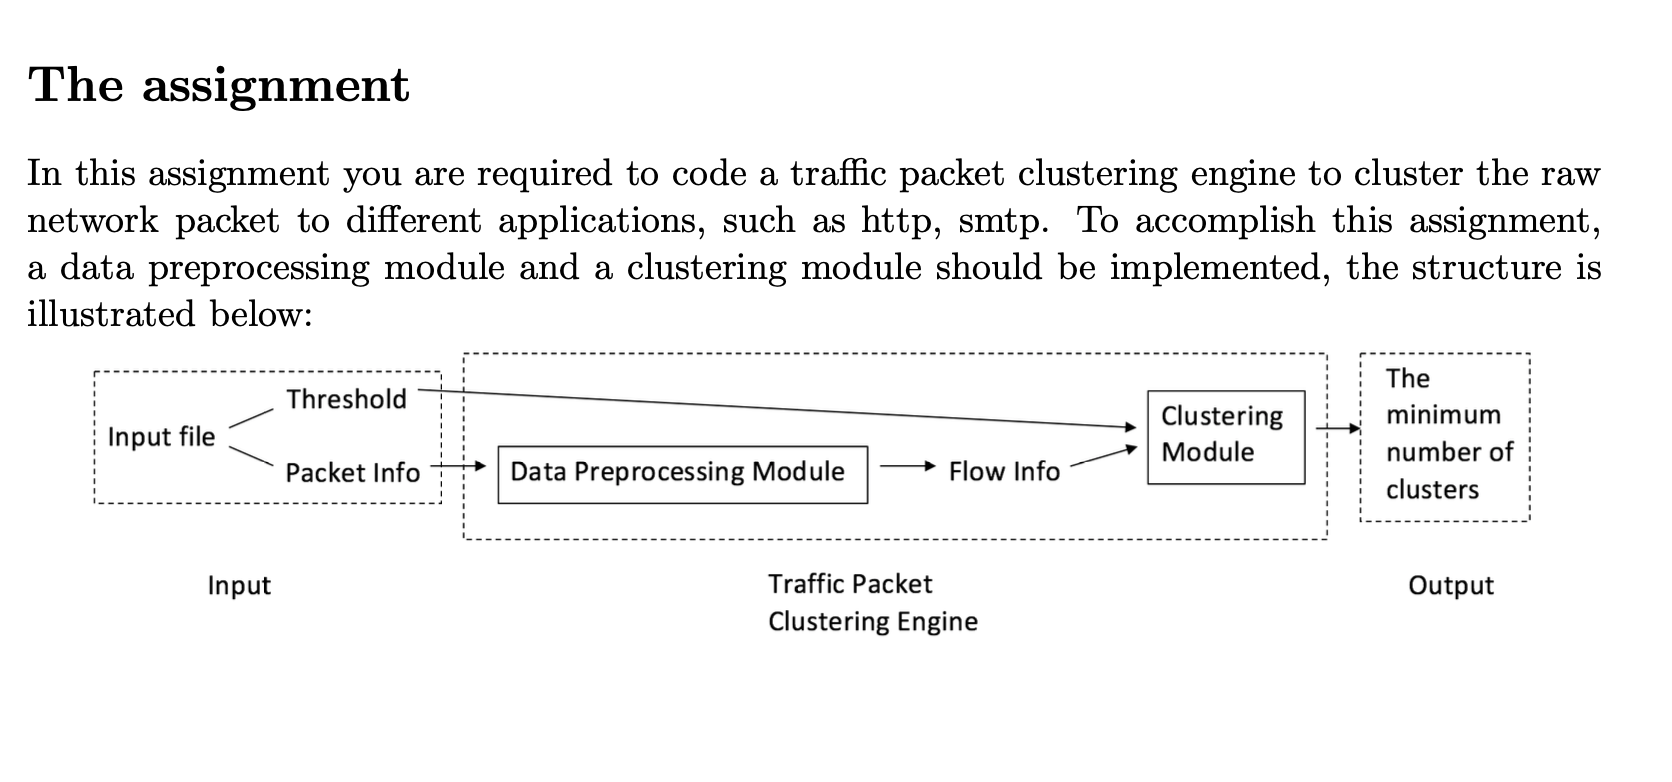 The assignment in this assignment you are required to code a traffic packet clustering engine to cluster the raw network pack